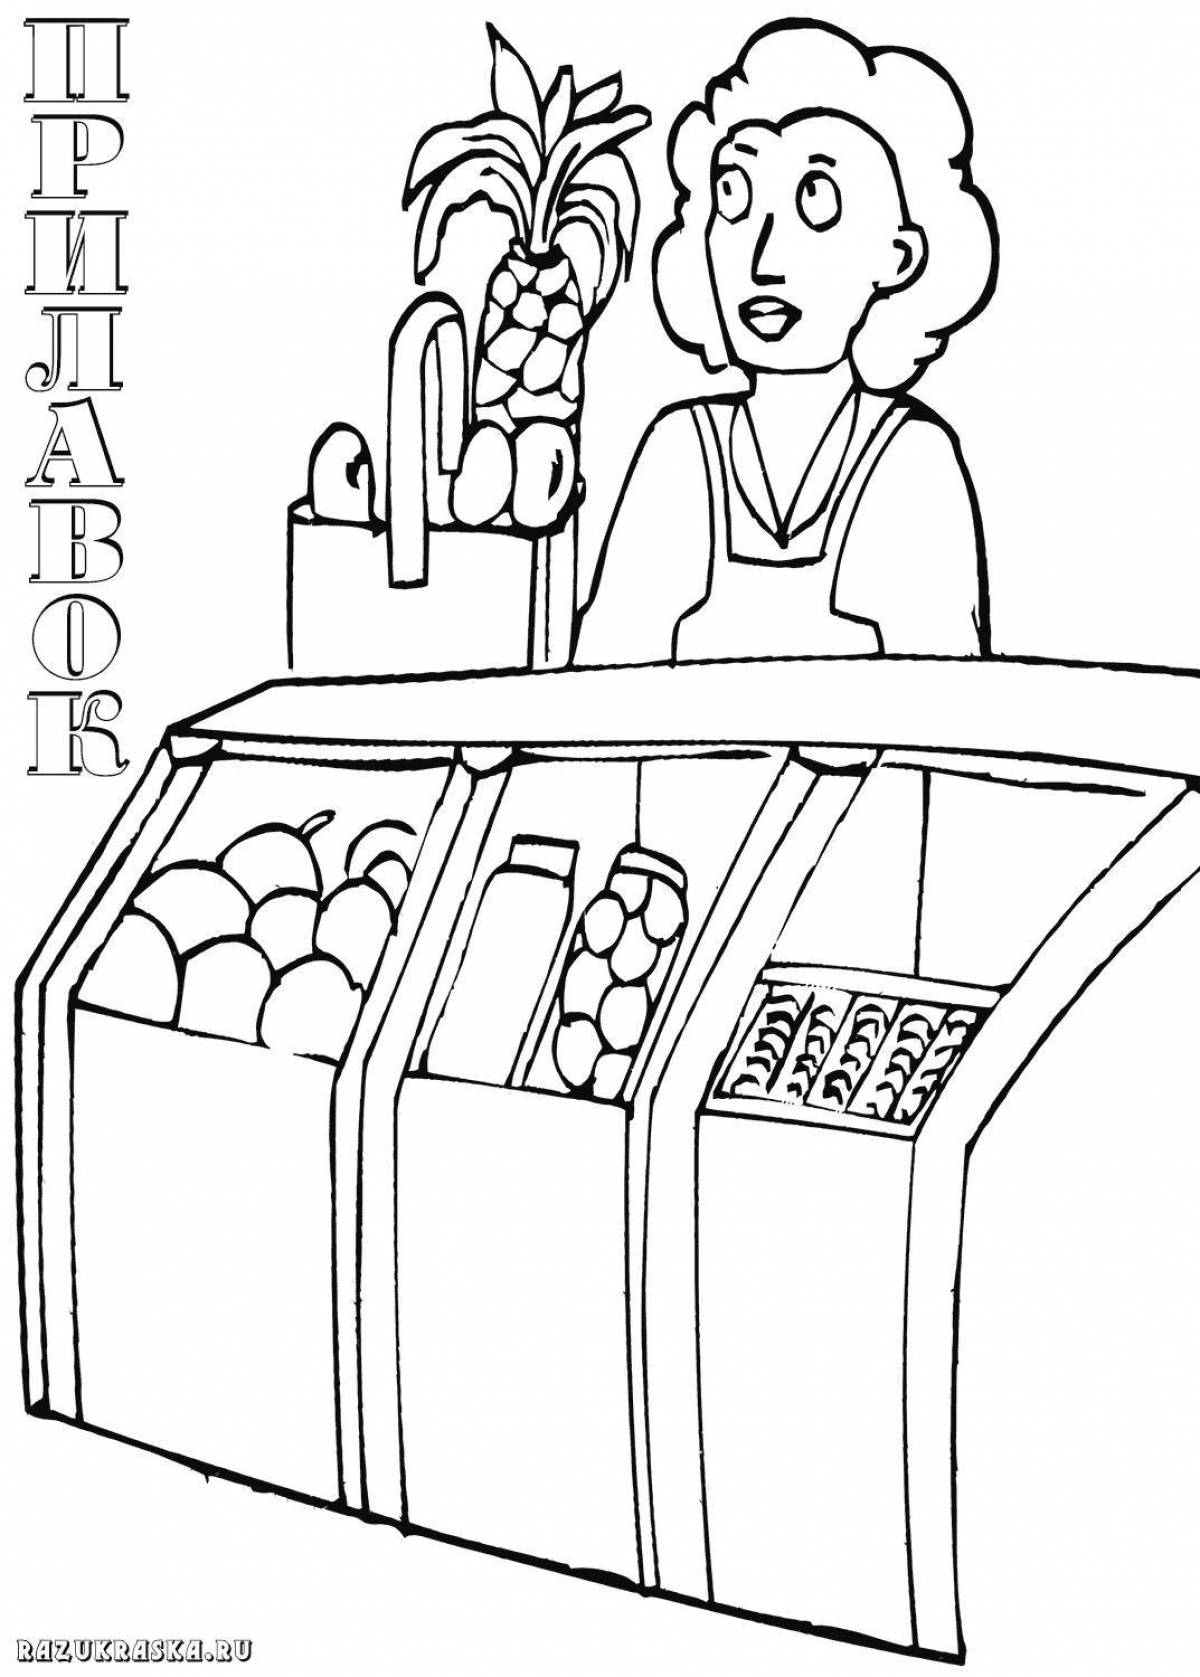 Coloring page of colorful food shop